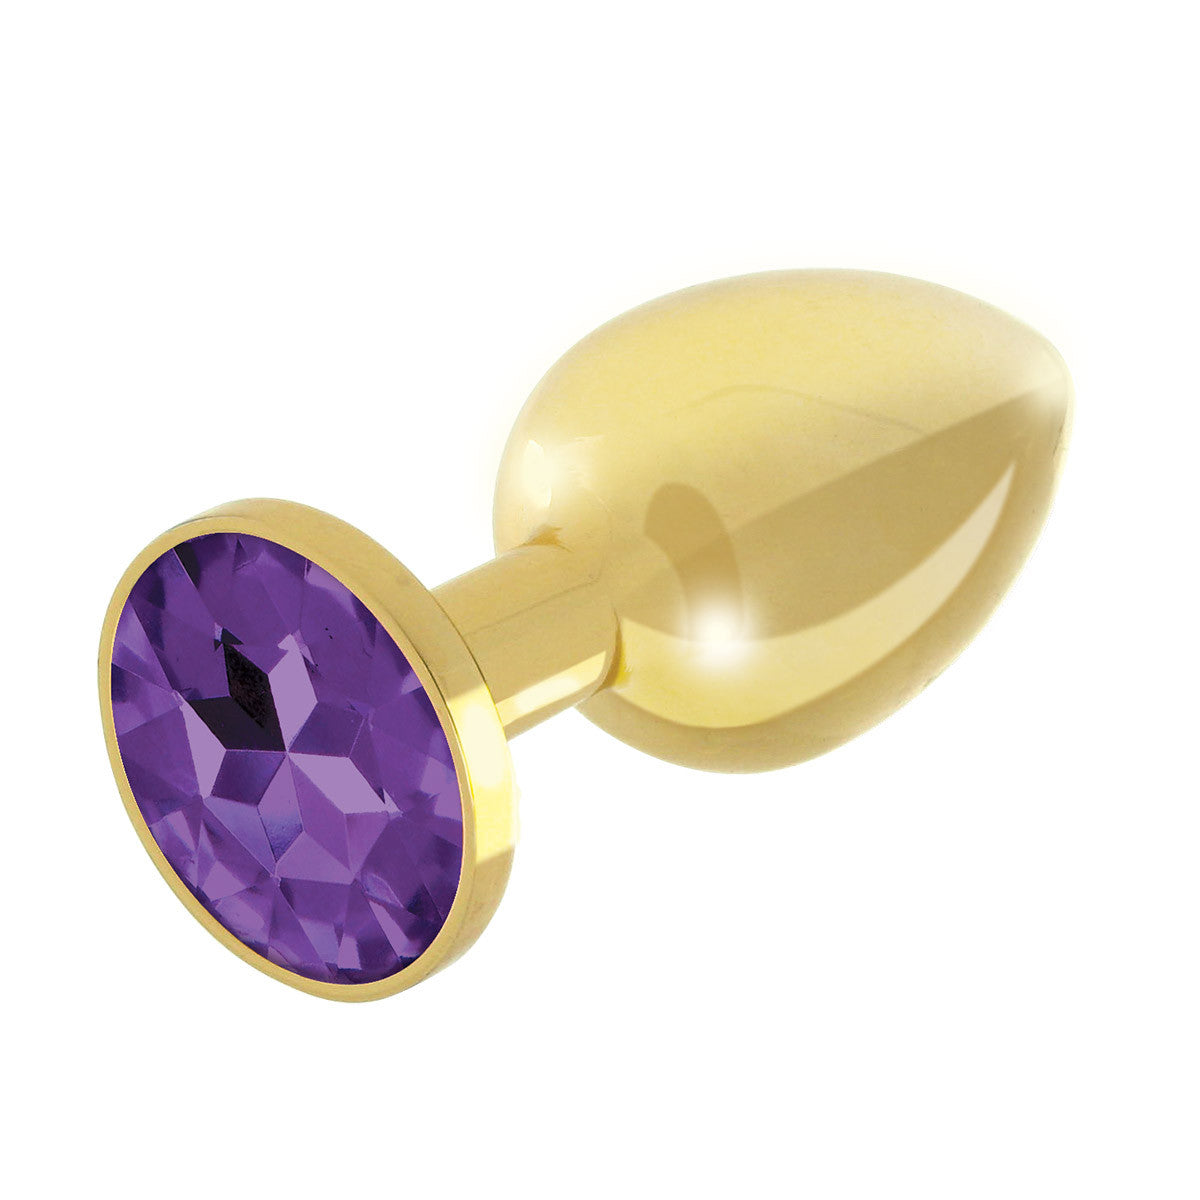 Rianne S Gold Booty Plug Set - Stainless steel with purple gem - Melody's Room